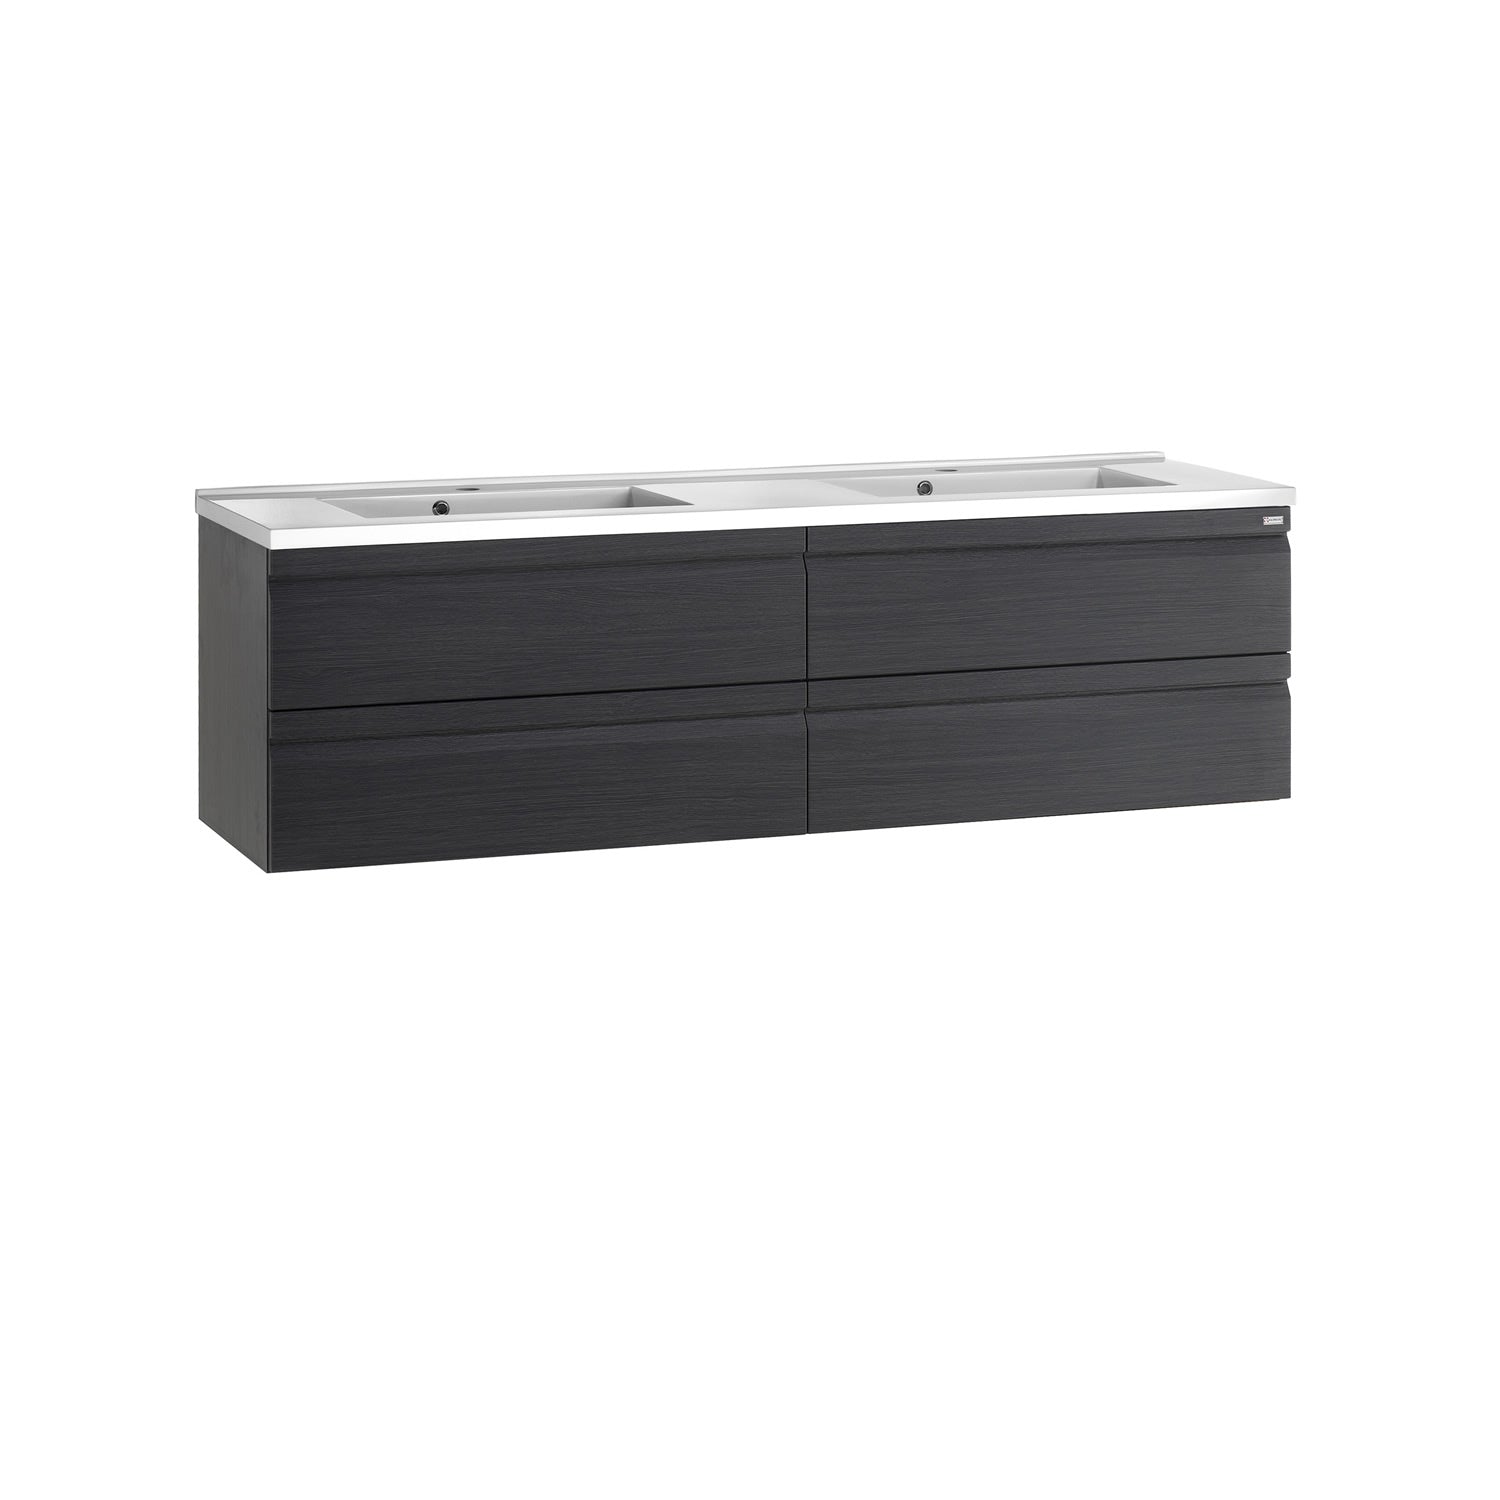 80" Double Vanity, Wall Mount, 4 Drawers with Soft Close, Grey, Serie Solco by VALENZUELA